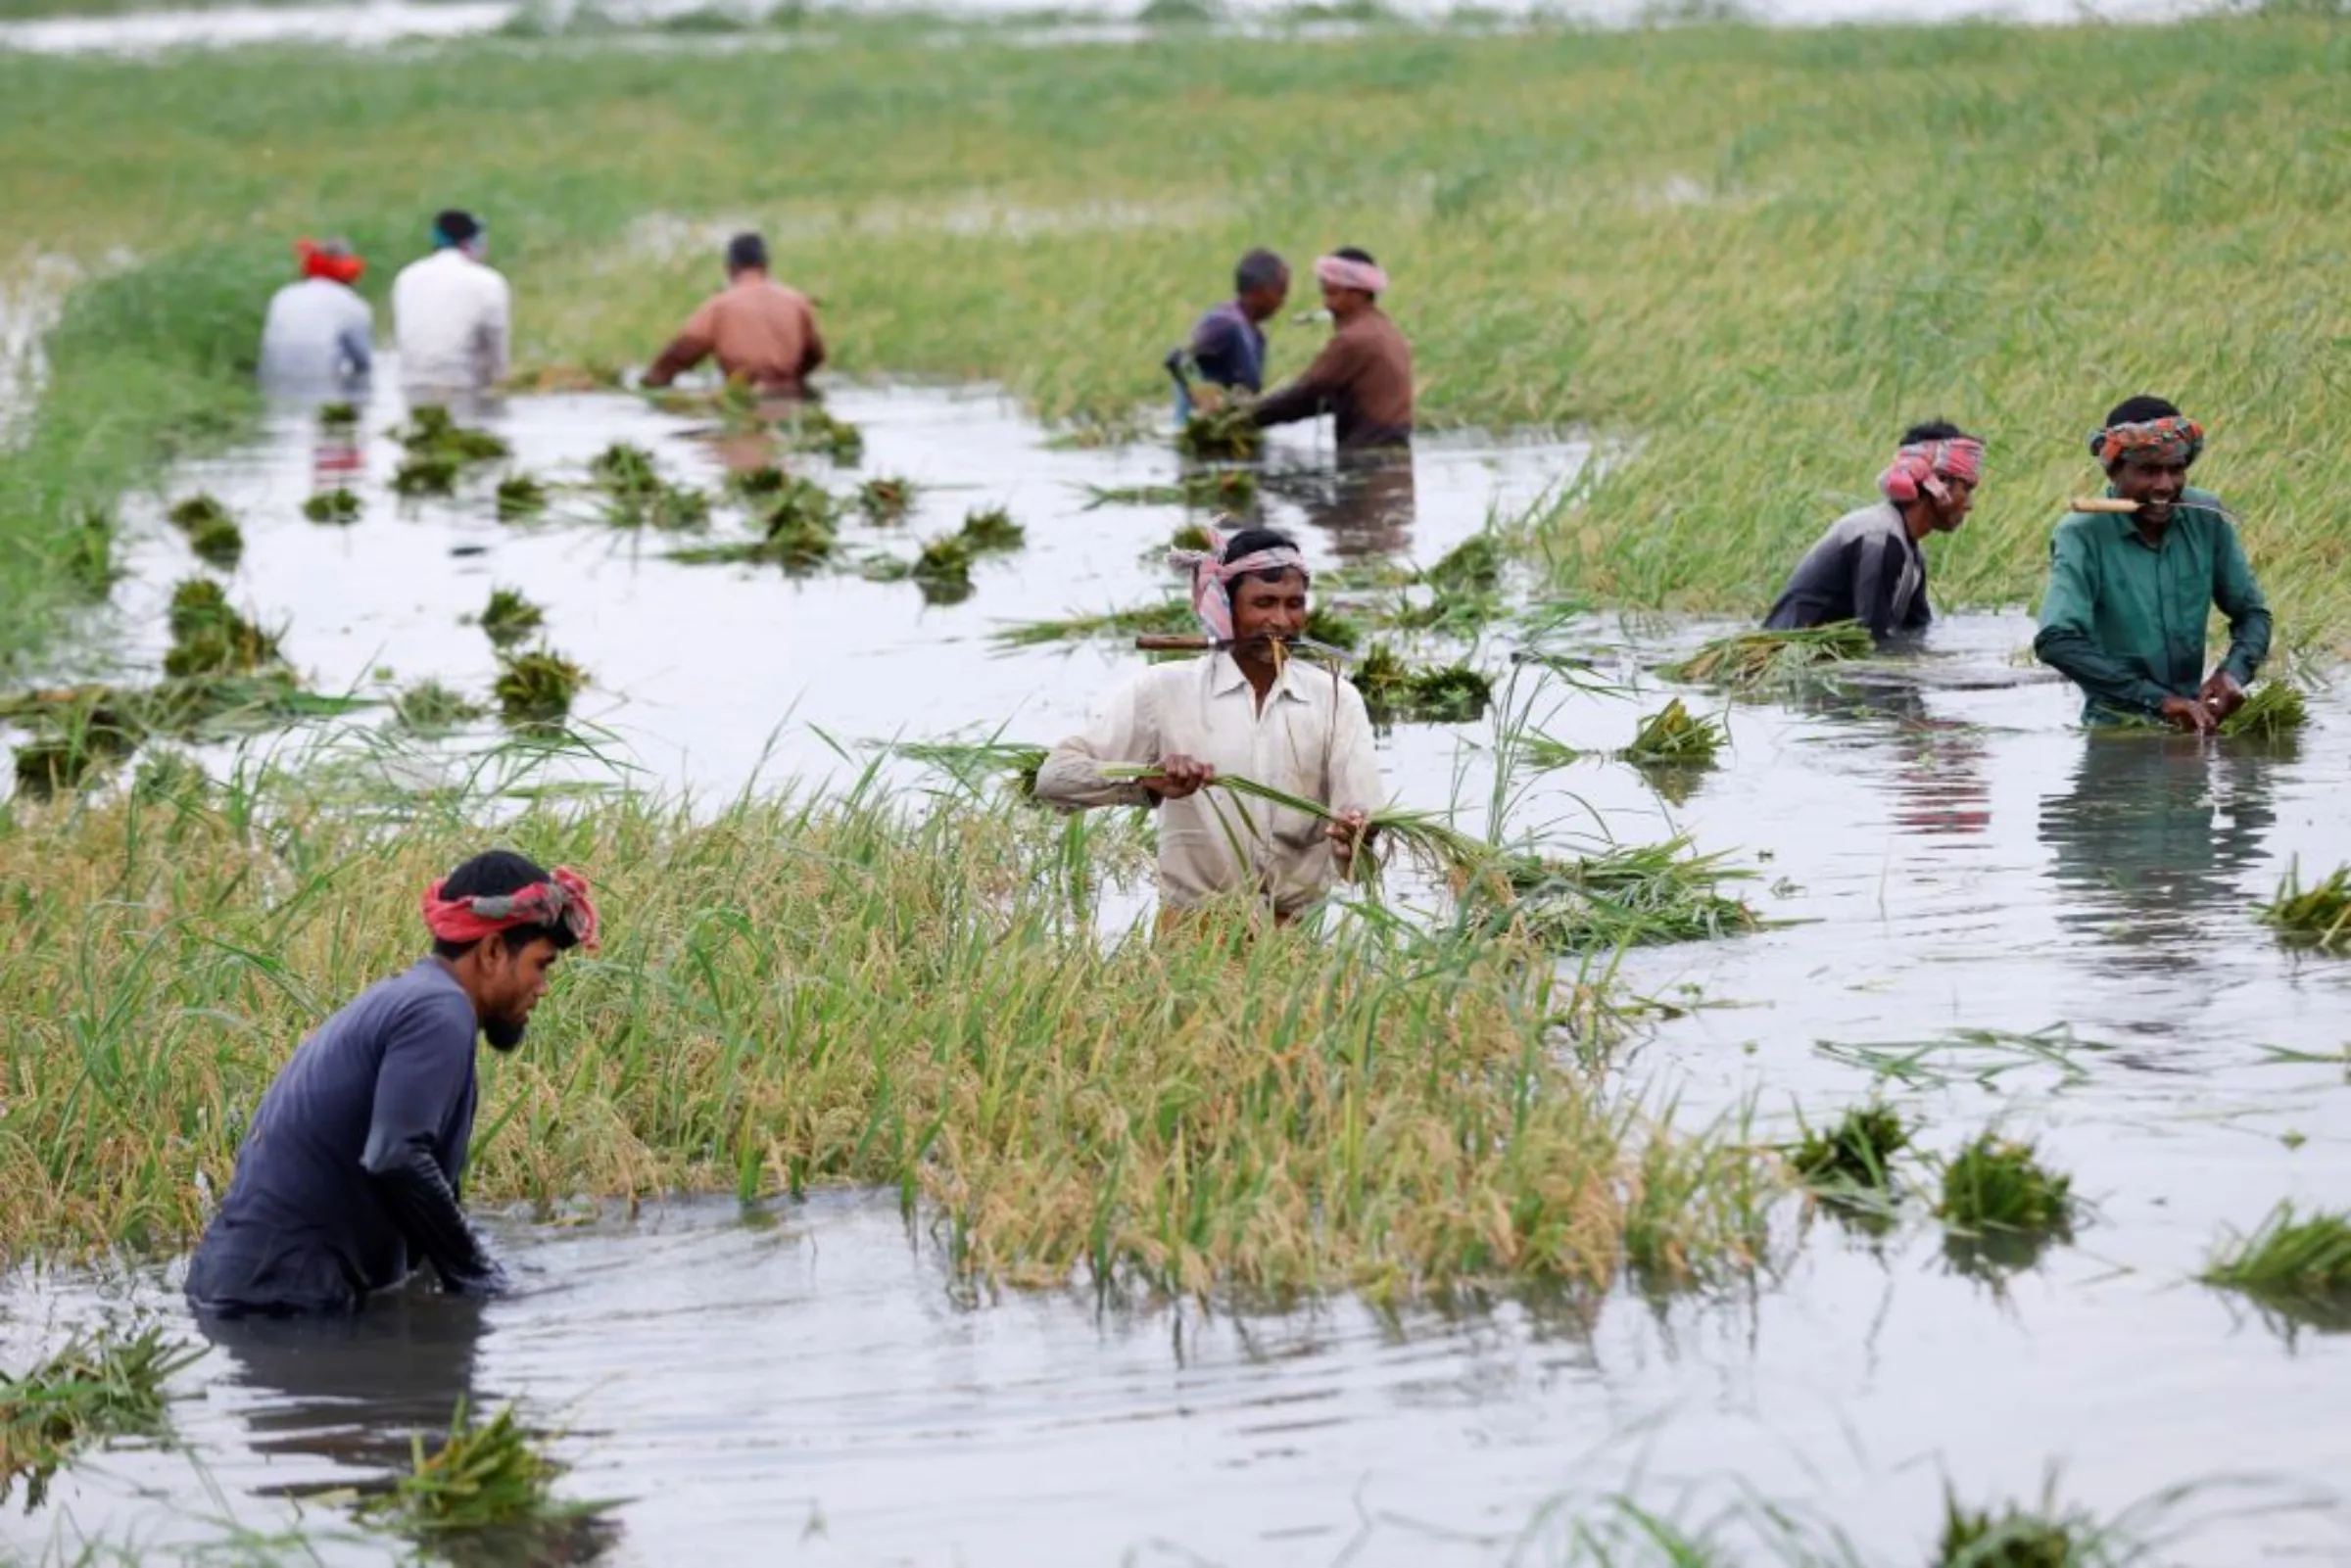 Workers harvest paddy from a flooded field in Ashulia, outskirts of Dhaka, Bangladesh, April 17, 2022